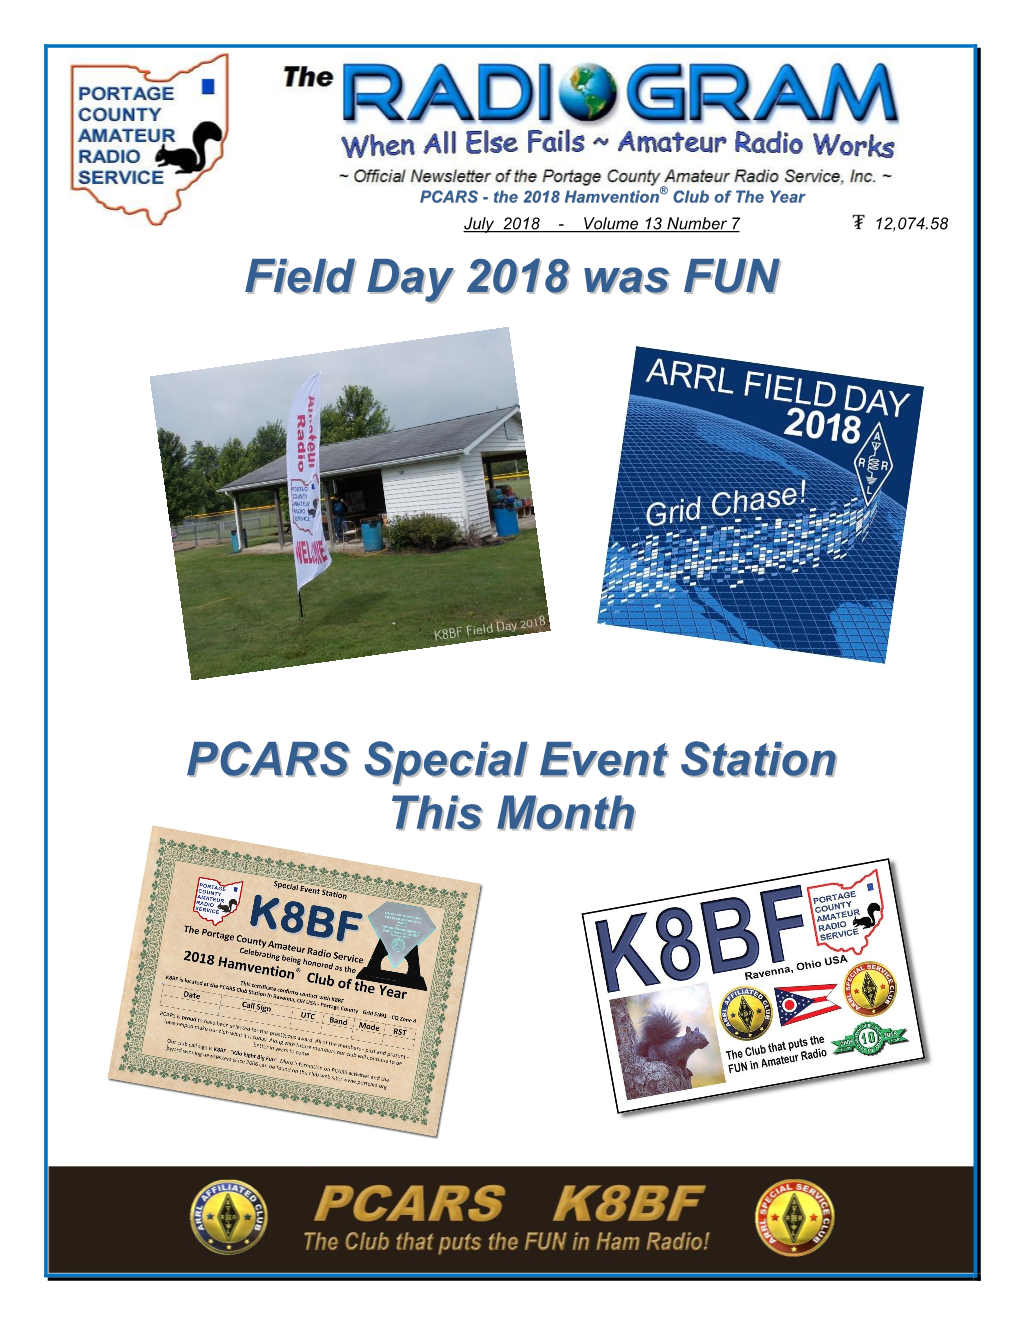 Field Day 2018 Was FUN PCARS Special Event Station This Month